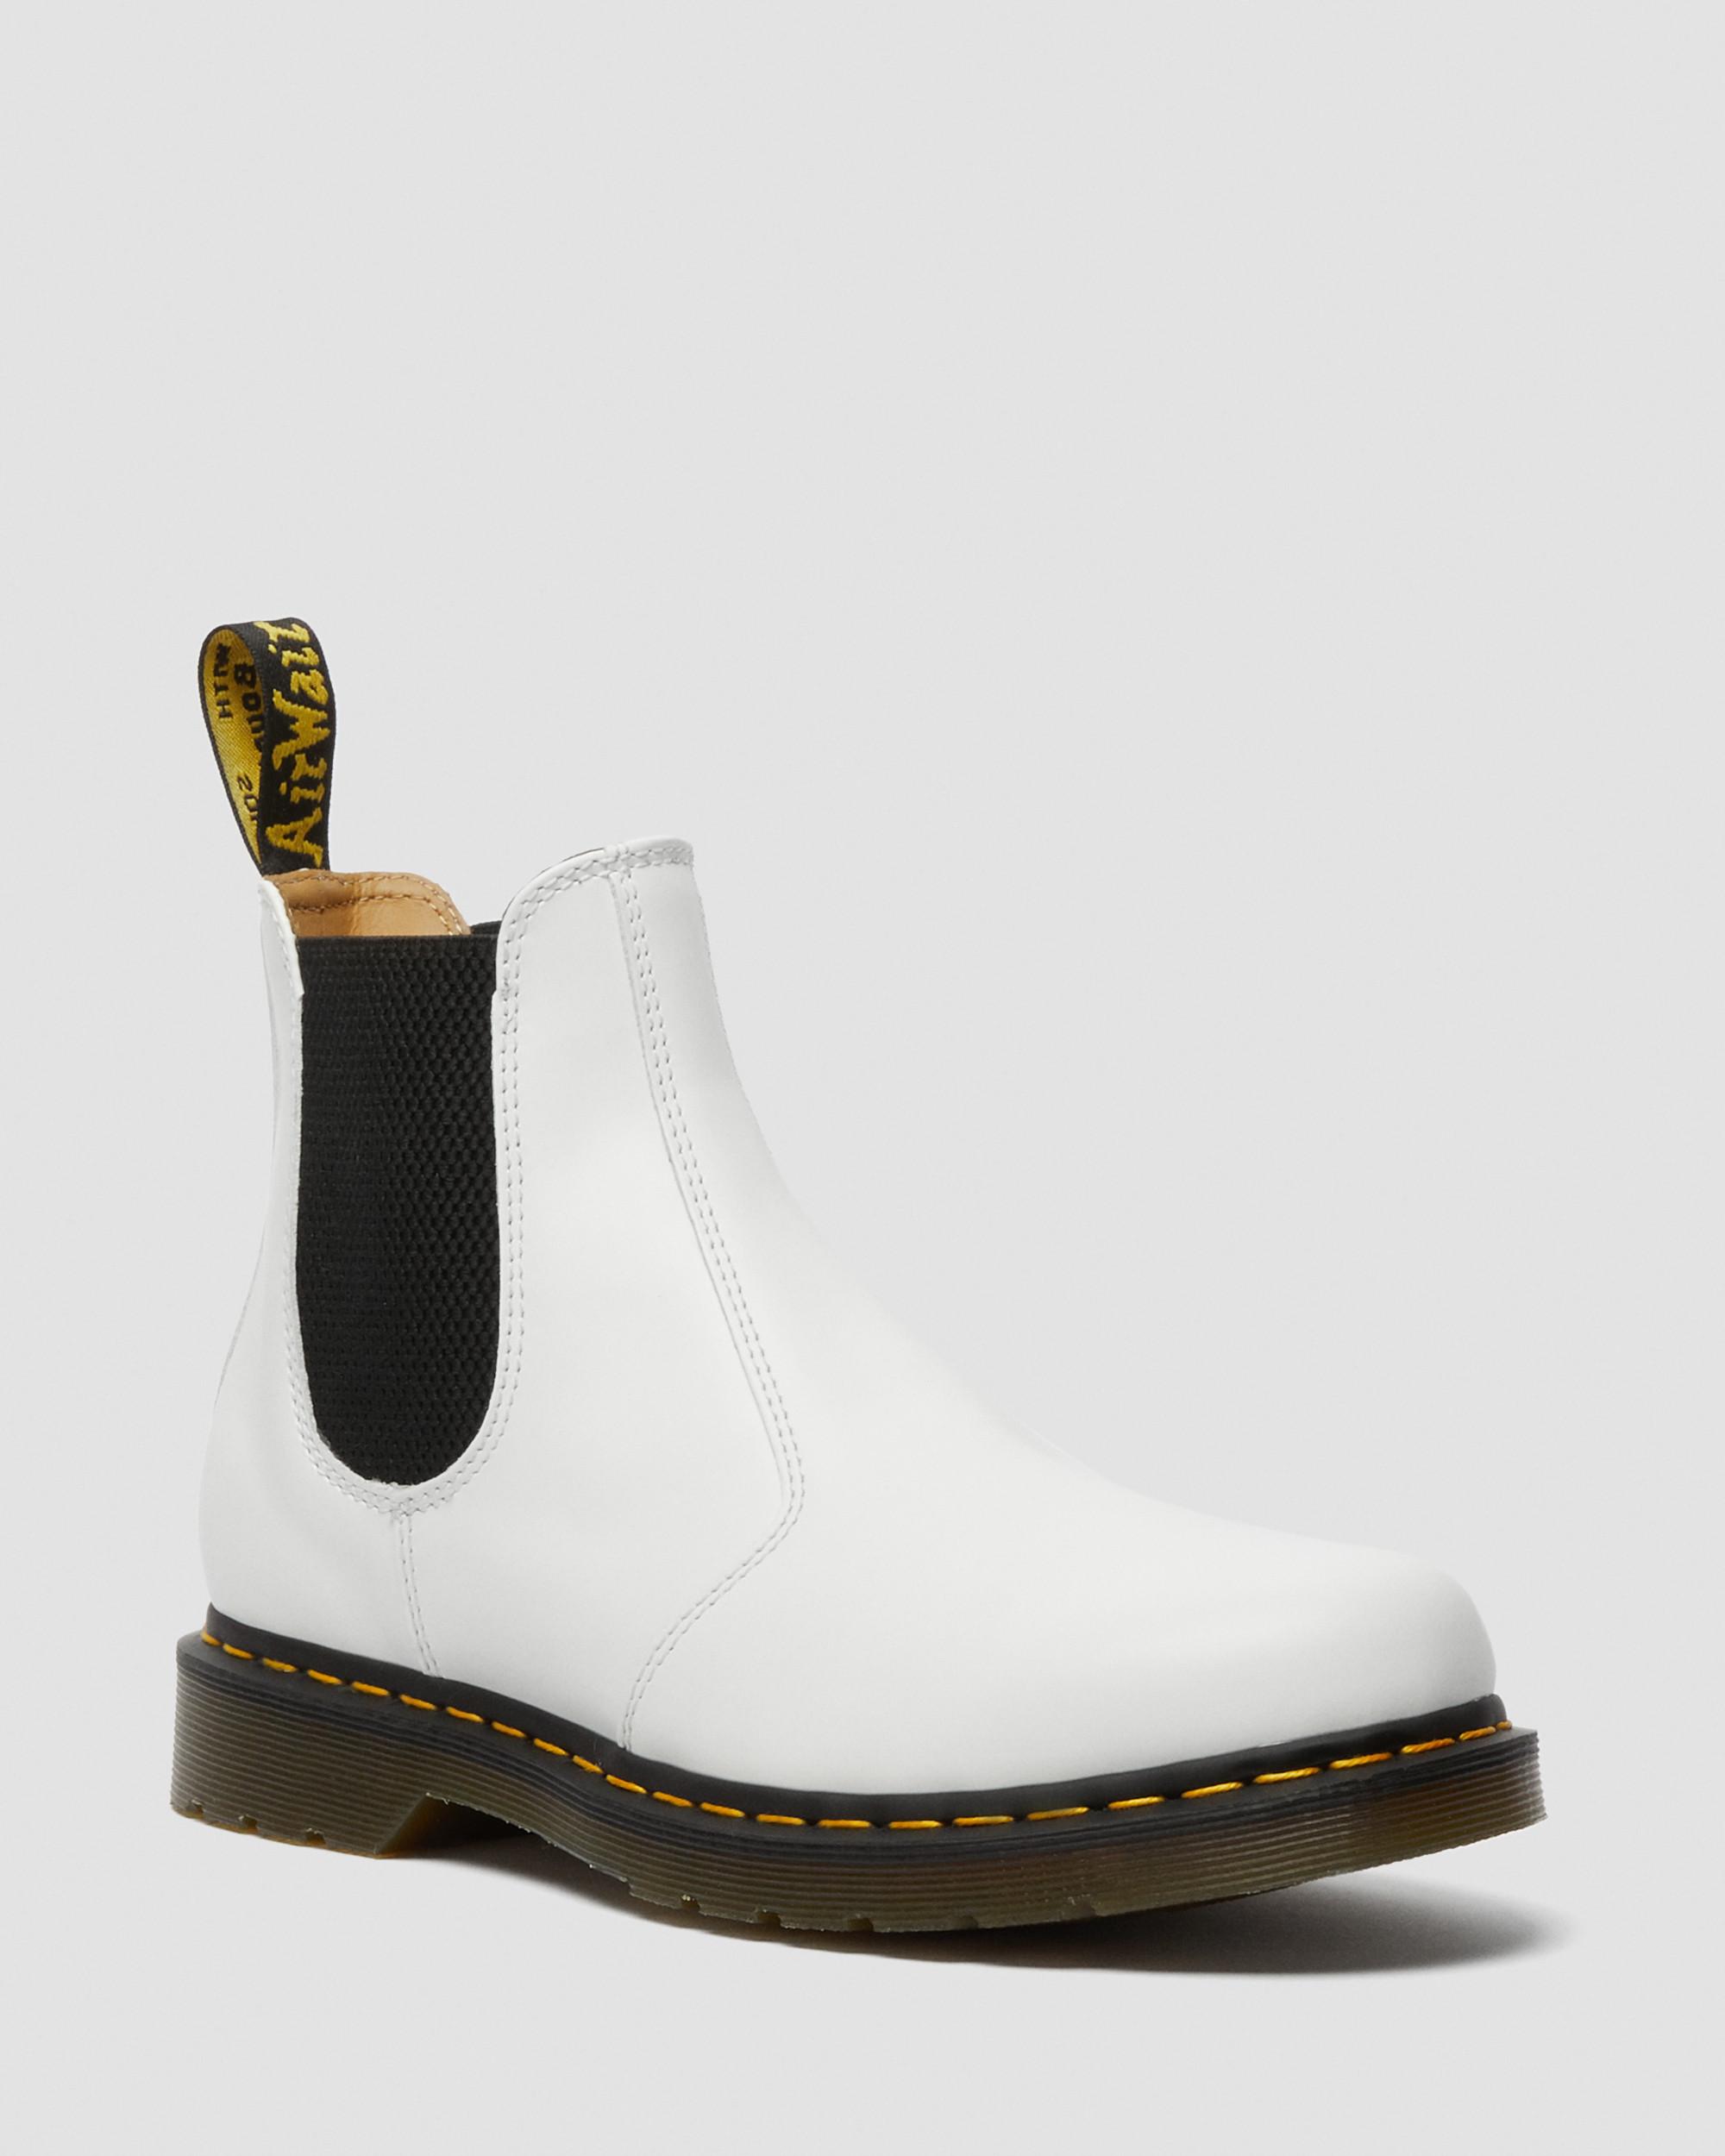 Chelsea boots 2976 Yellow Stitch en cuir Smooth